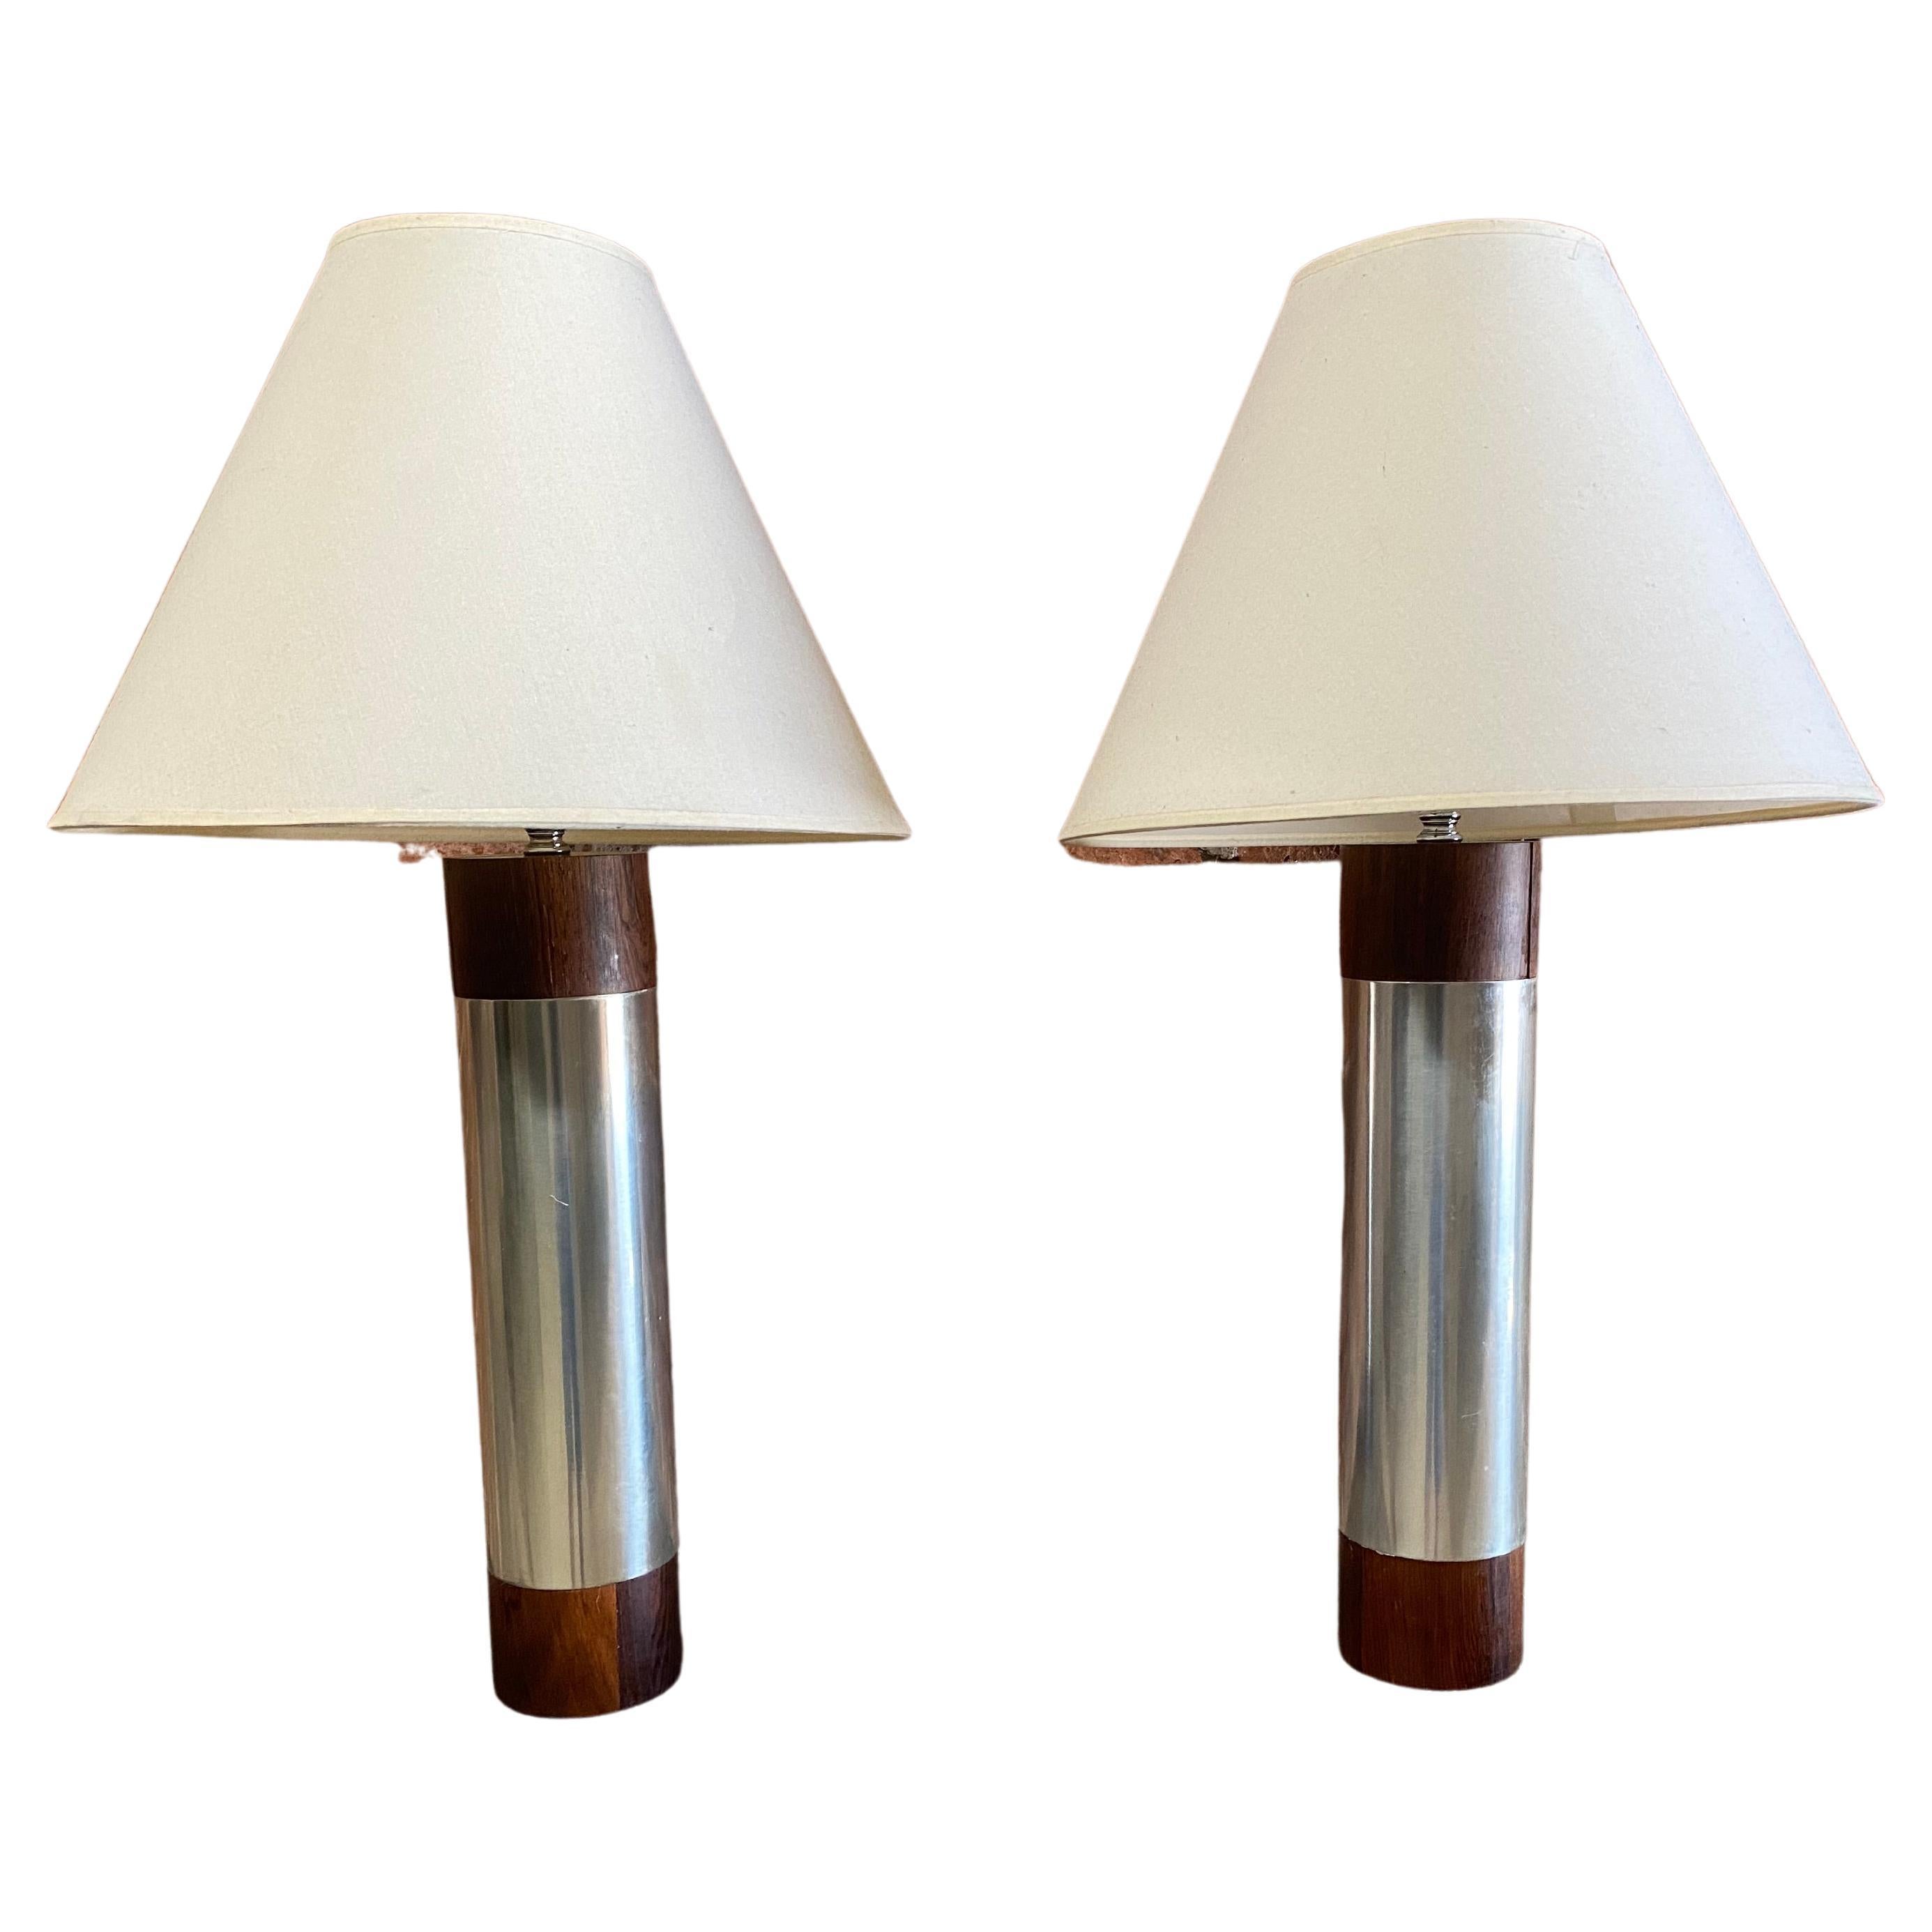 A fantastic pair of polished cylindrical aluminum and rosewood capped table lamps. Sleek and elegant design. Nicely figure rosewood grain complemented by the simple clean lines of the aluminum. They have a wonderful presence and will go just about